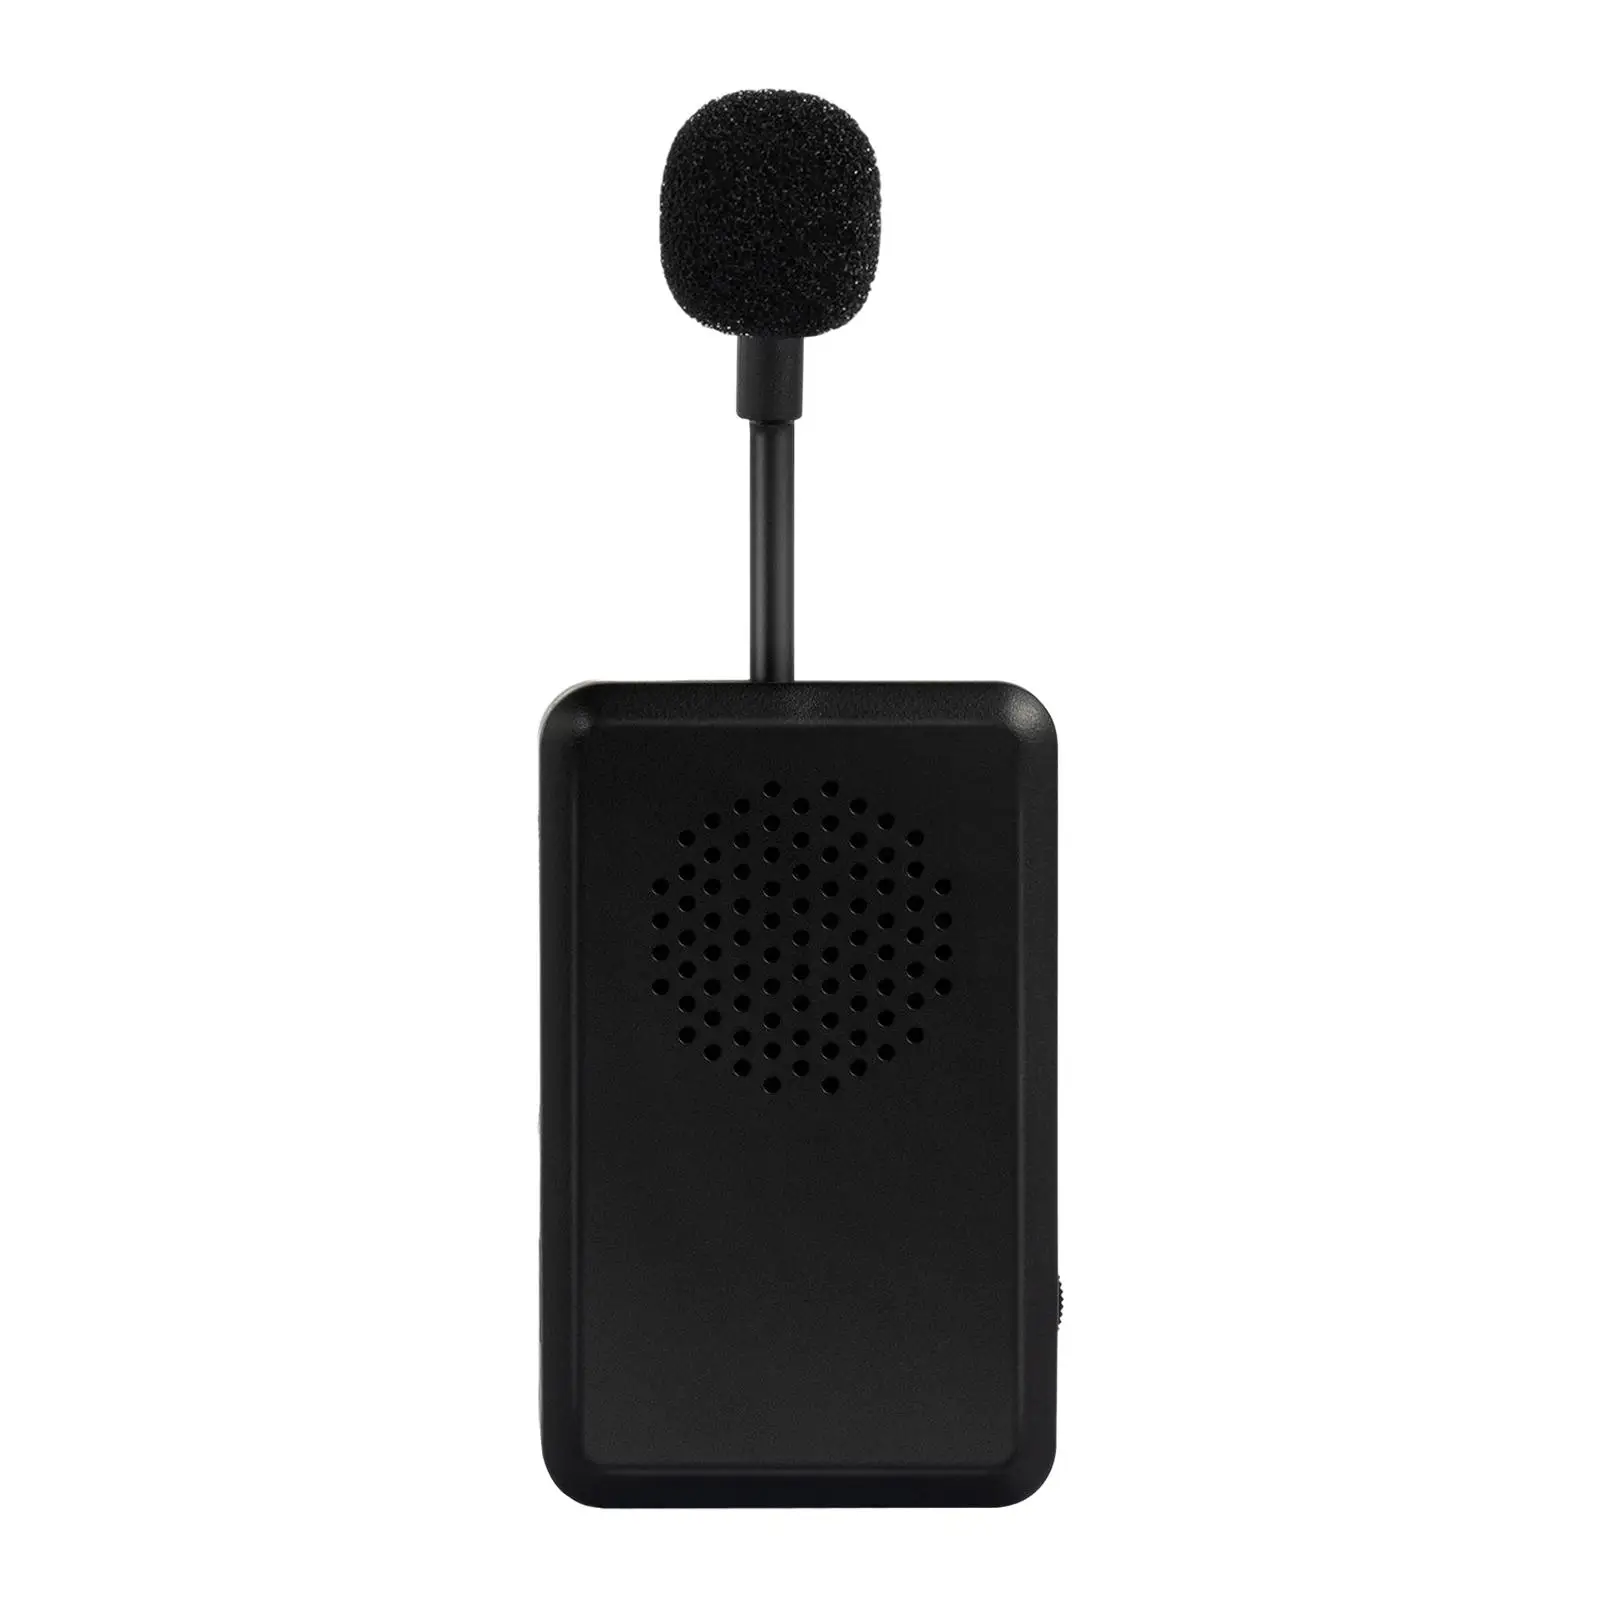 Portable Voice Amplifier Microphone Loudspeaker Mic Rechargeable for Teaching Tourist Guide